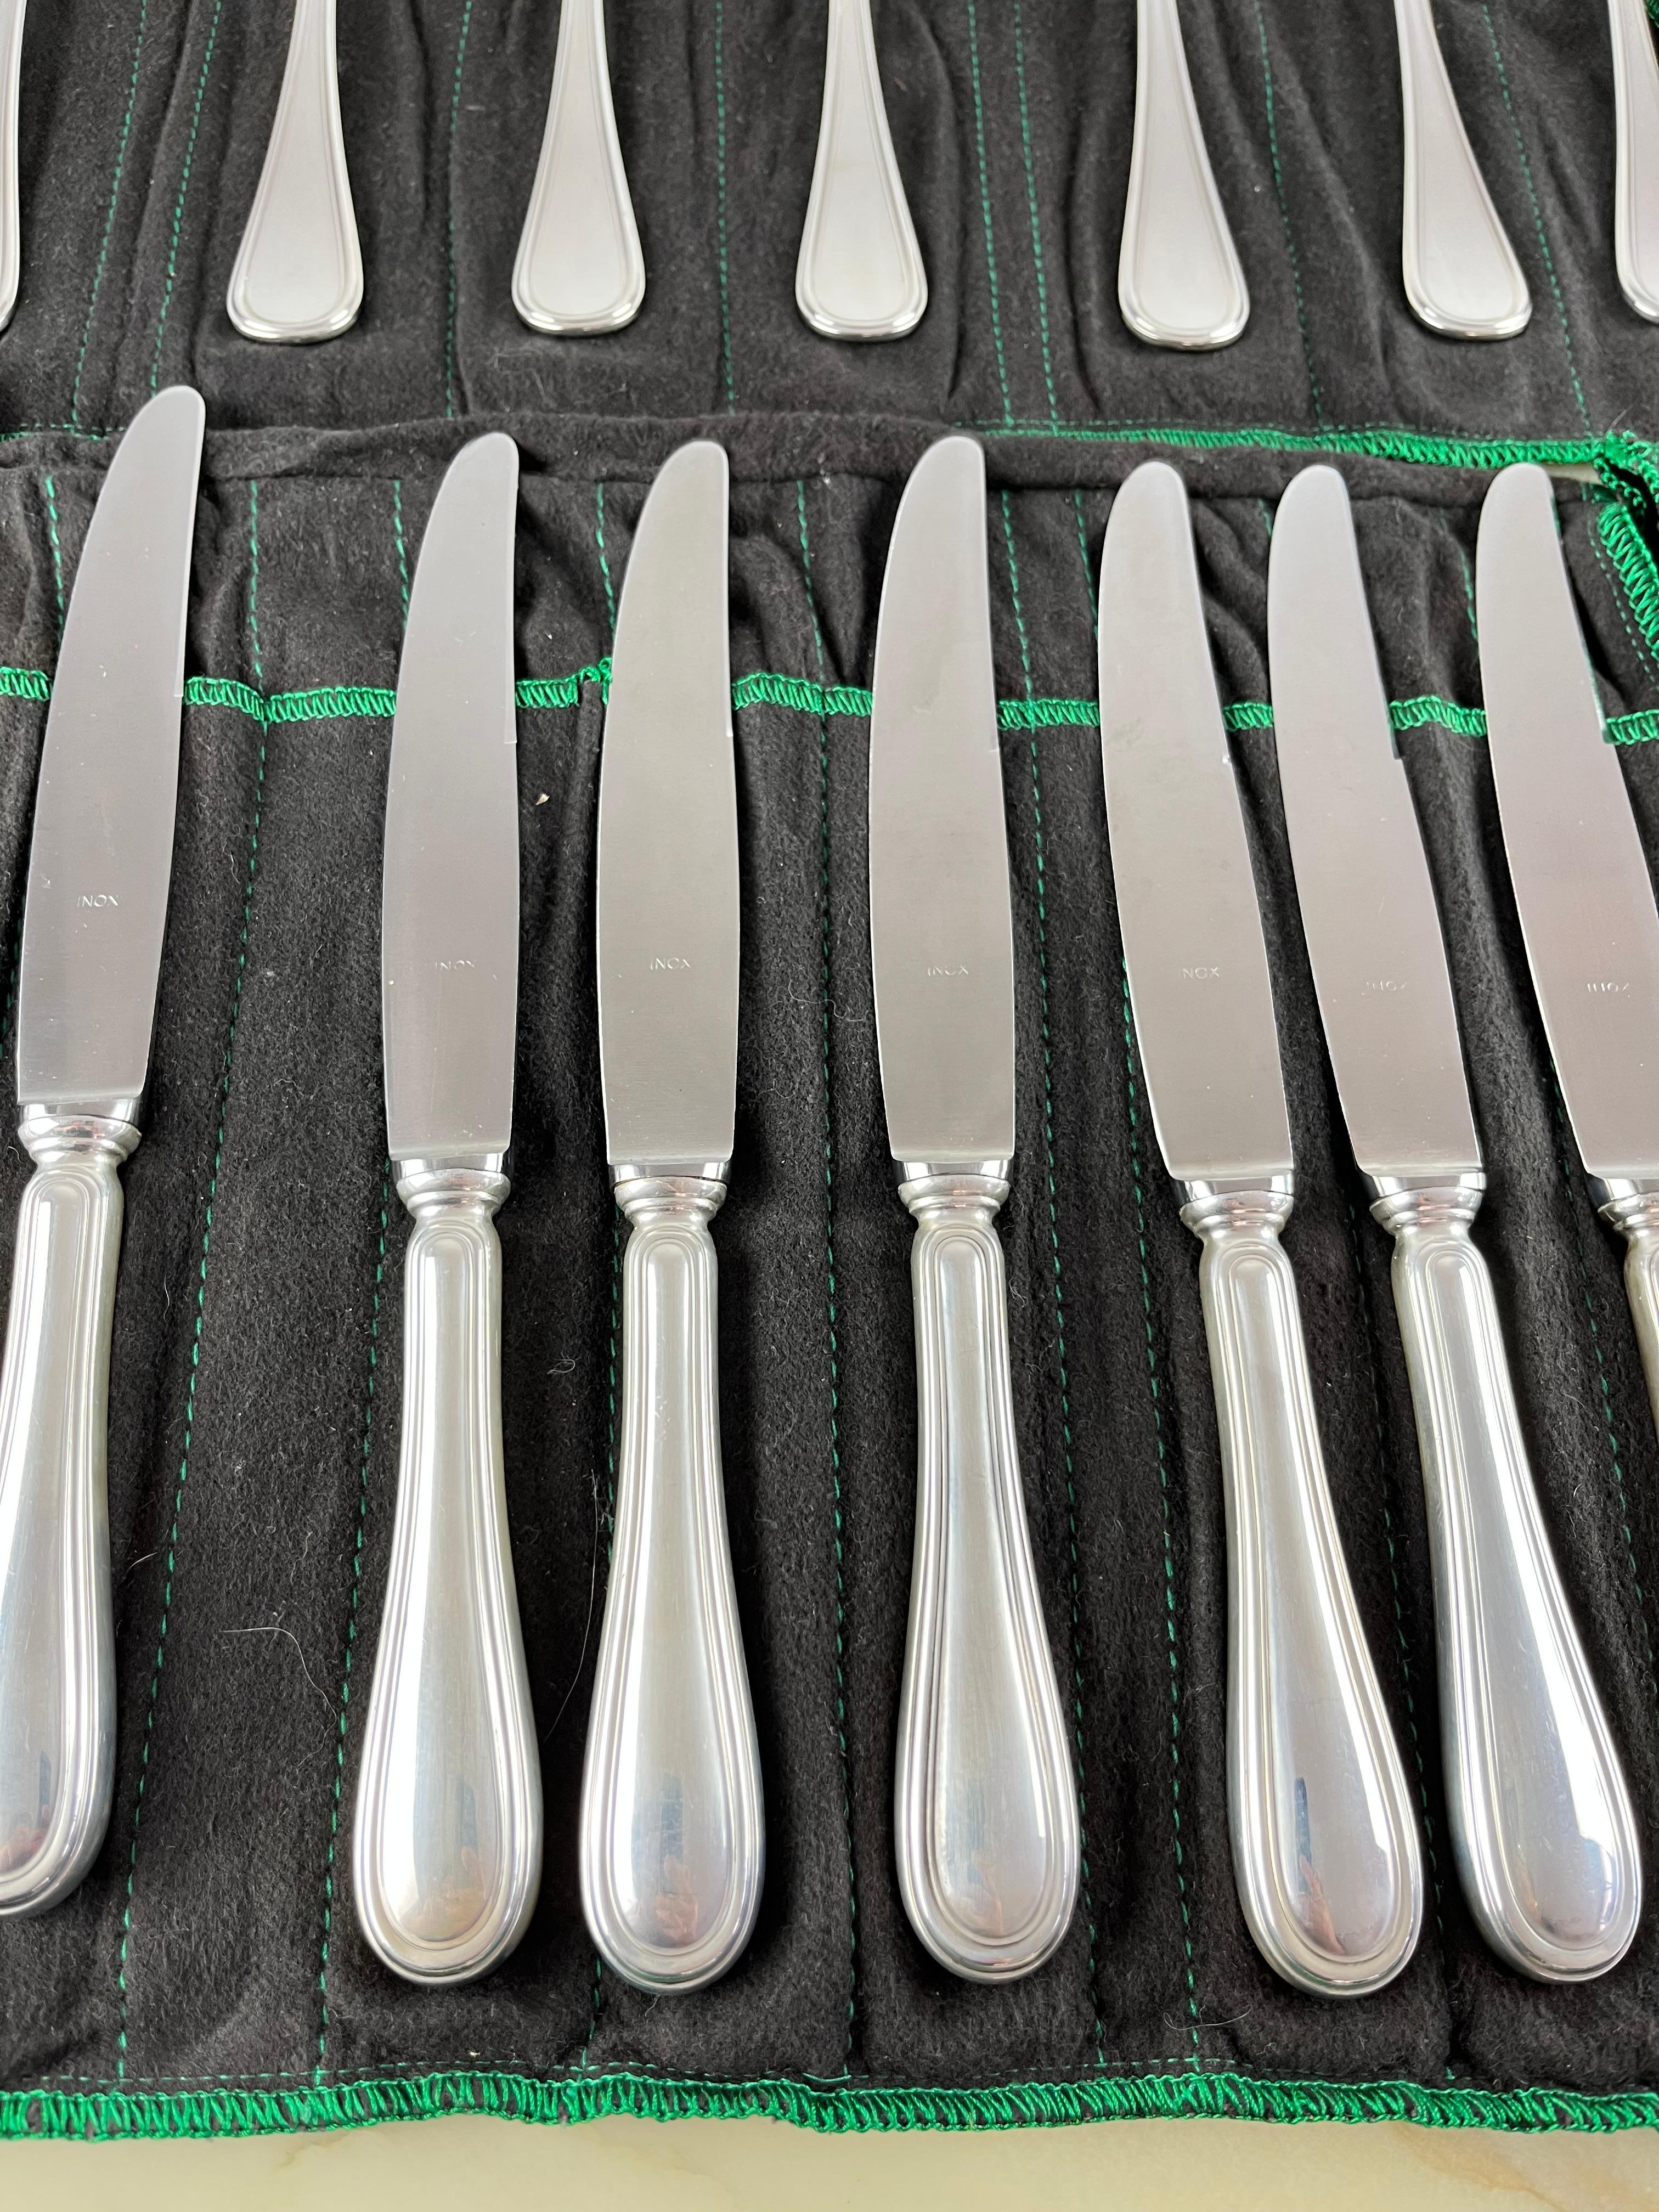 Cutlery service
 101 pieces of 800 silver, English Style, Italy, 1990s, Zaramella silverware.
The peculiarity of this service is to have 24 table forks.
Gross weight gr. 7310.00. The weight of the silver alone is 5658.00 grams. All the pieces are